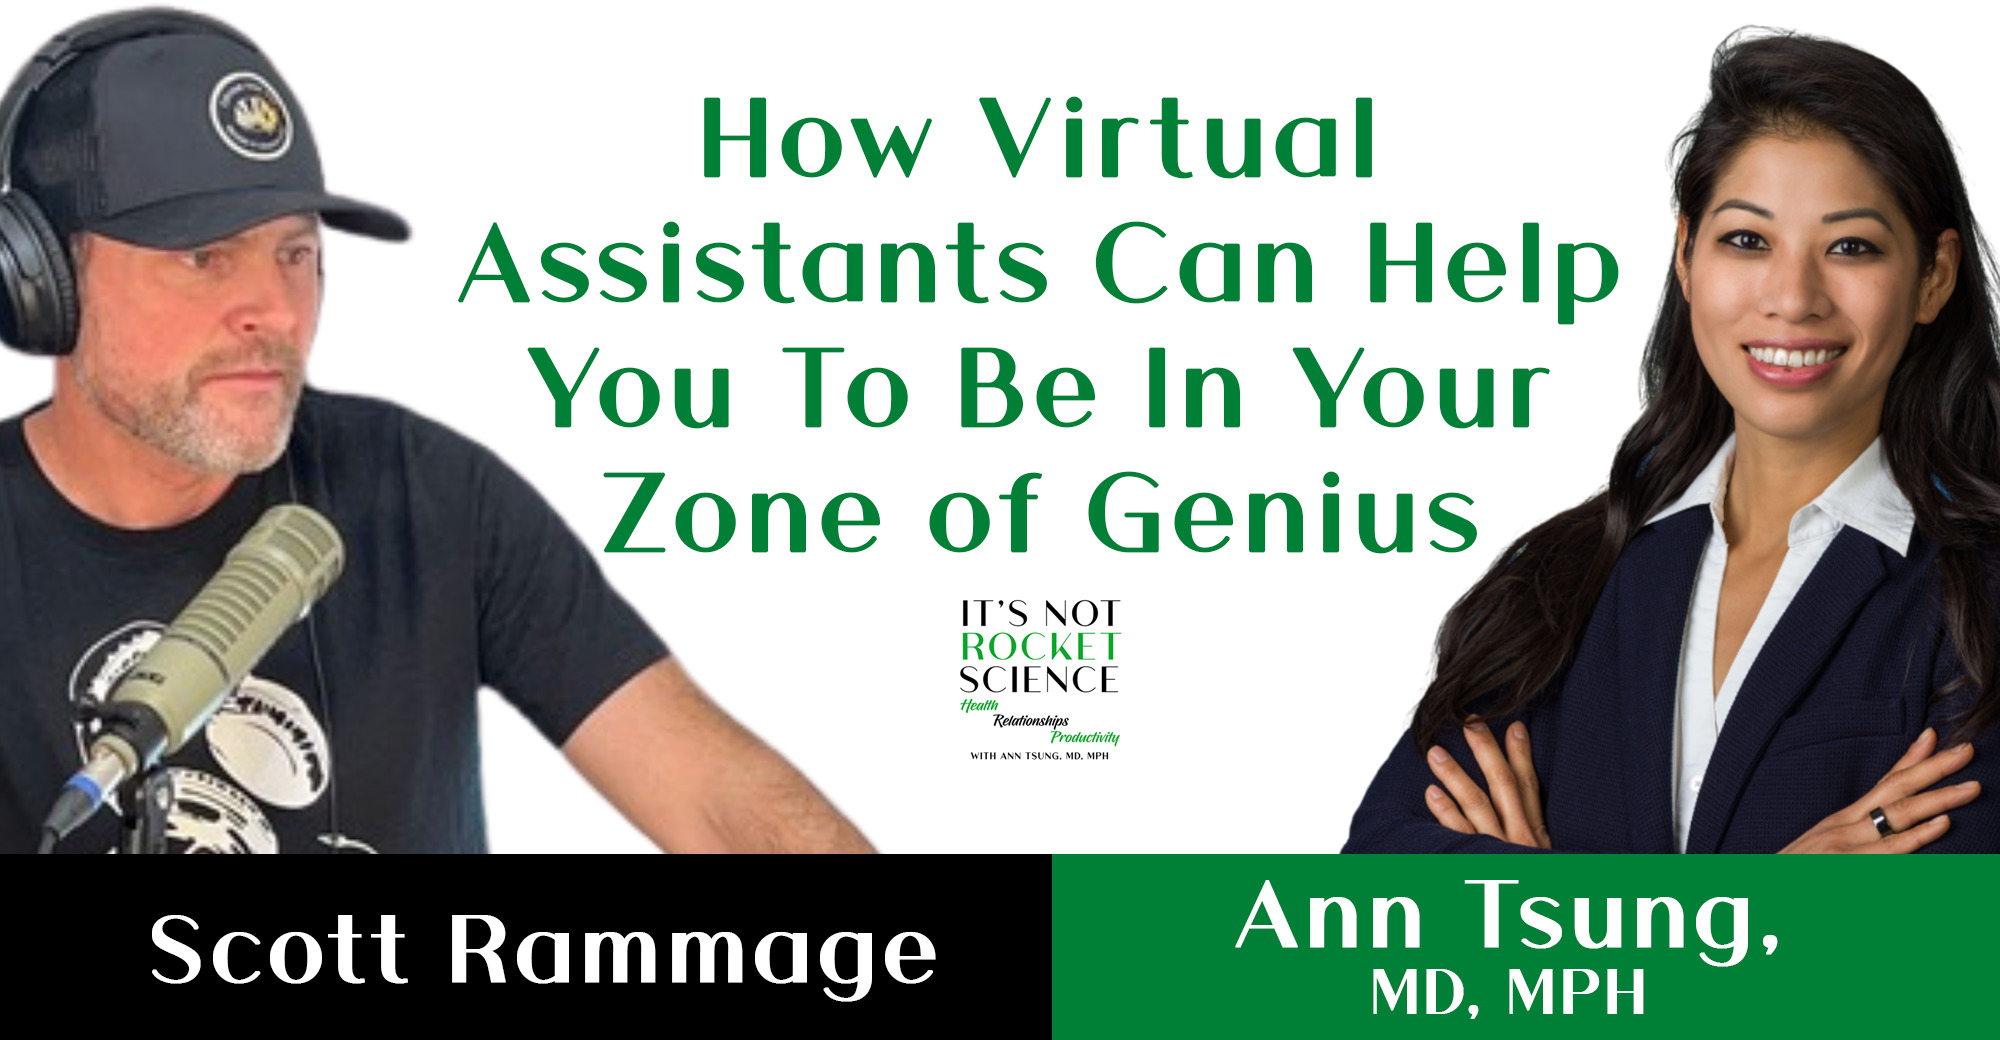 029. How Virtual Assistants Can Help You To Be In Your Zone of Genius with Scott Rammage – Why You Need One, Example Tasks, the Recruiting Process, Onboarding, Common Mistakes, and more with Scott Rammage